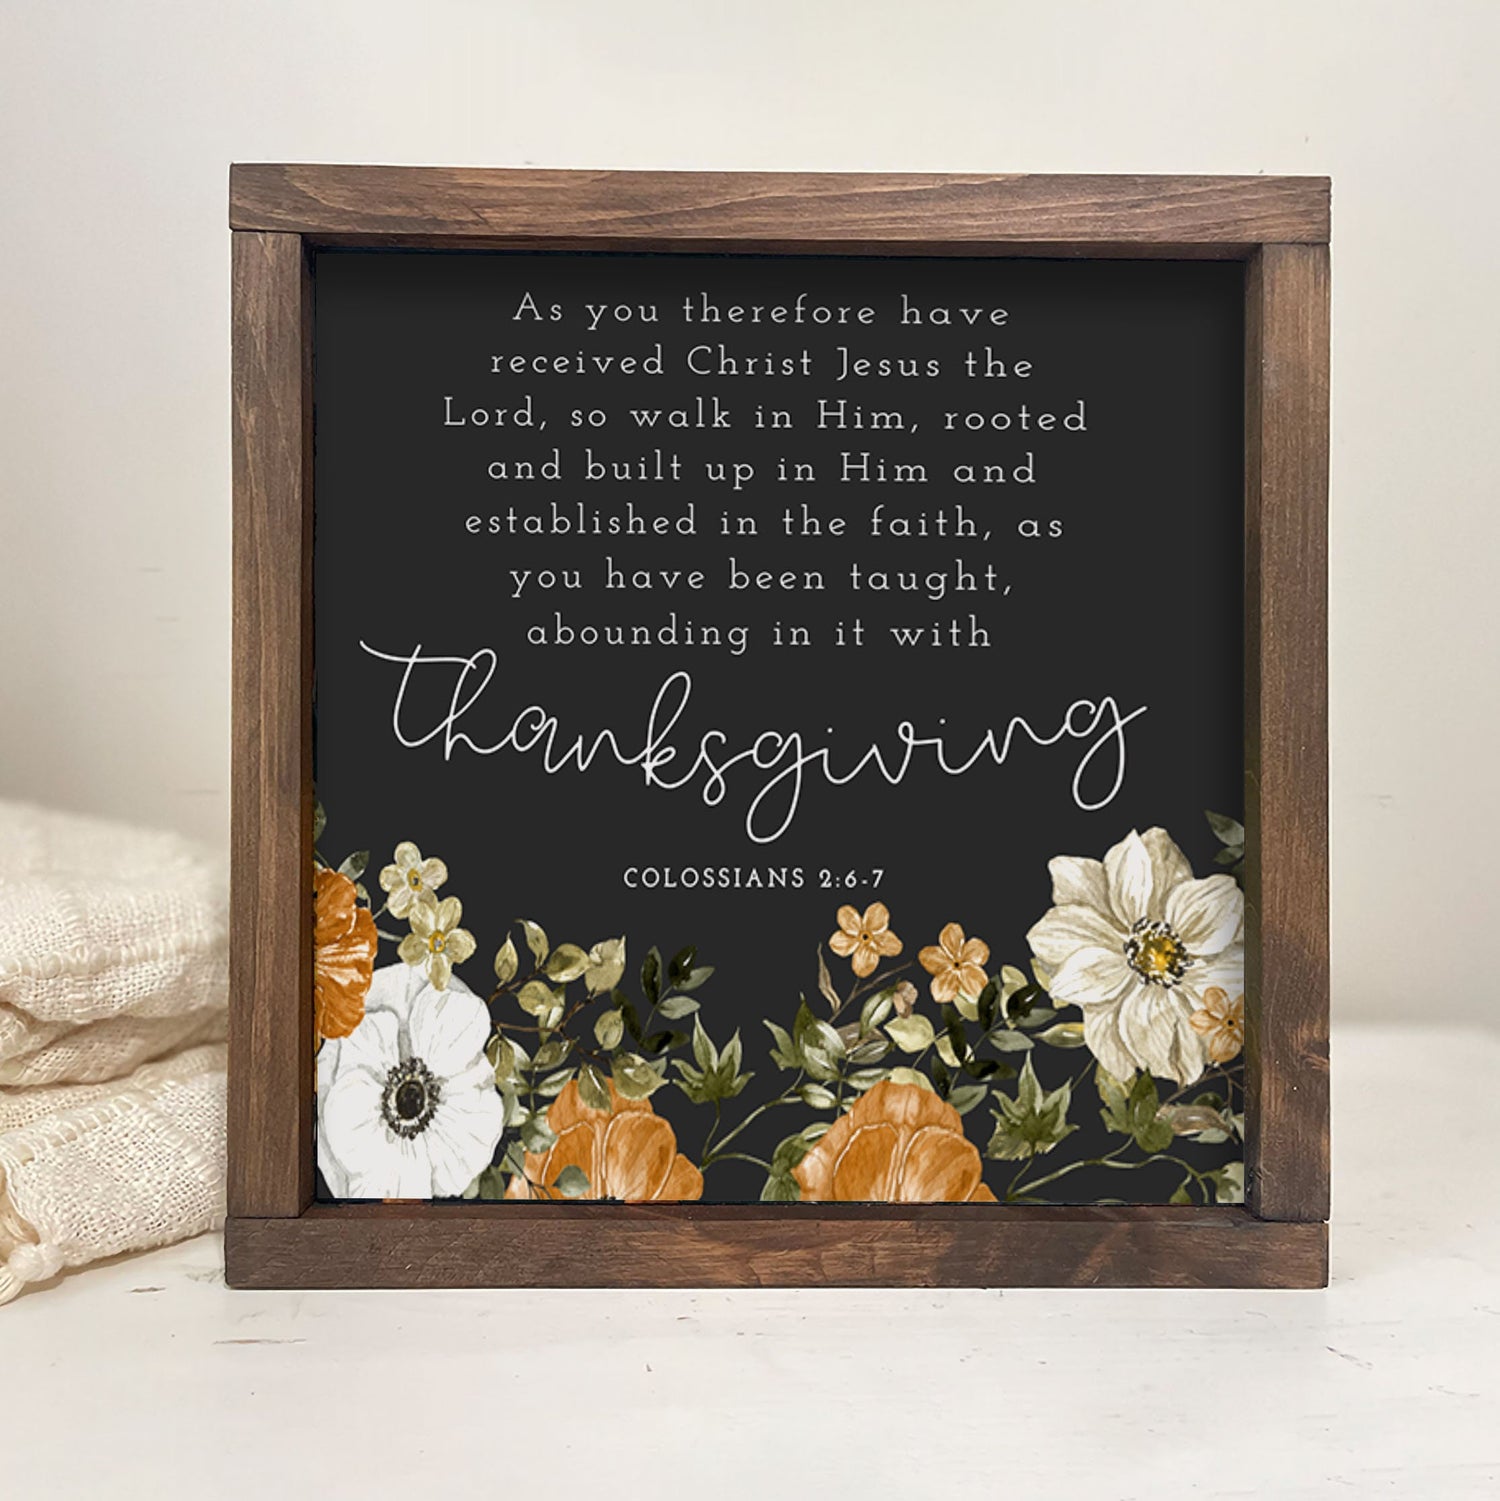 Vintage Floral FALL WALL DECOR, Thanksgiving sign, Colossians 2:6-7, Thanksgiving décor, Autumn Farmhouse, rustic wood sign, Fall Décor